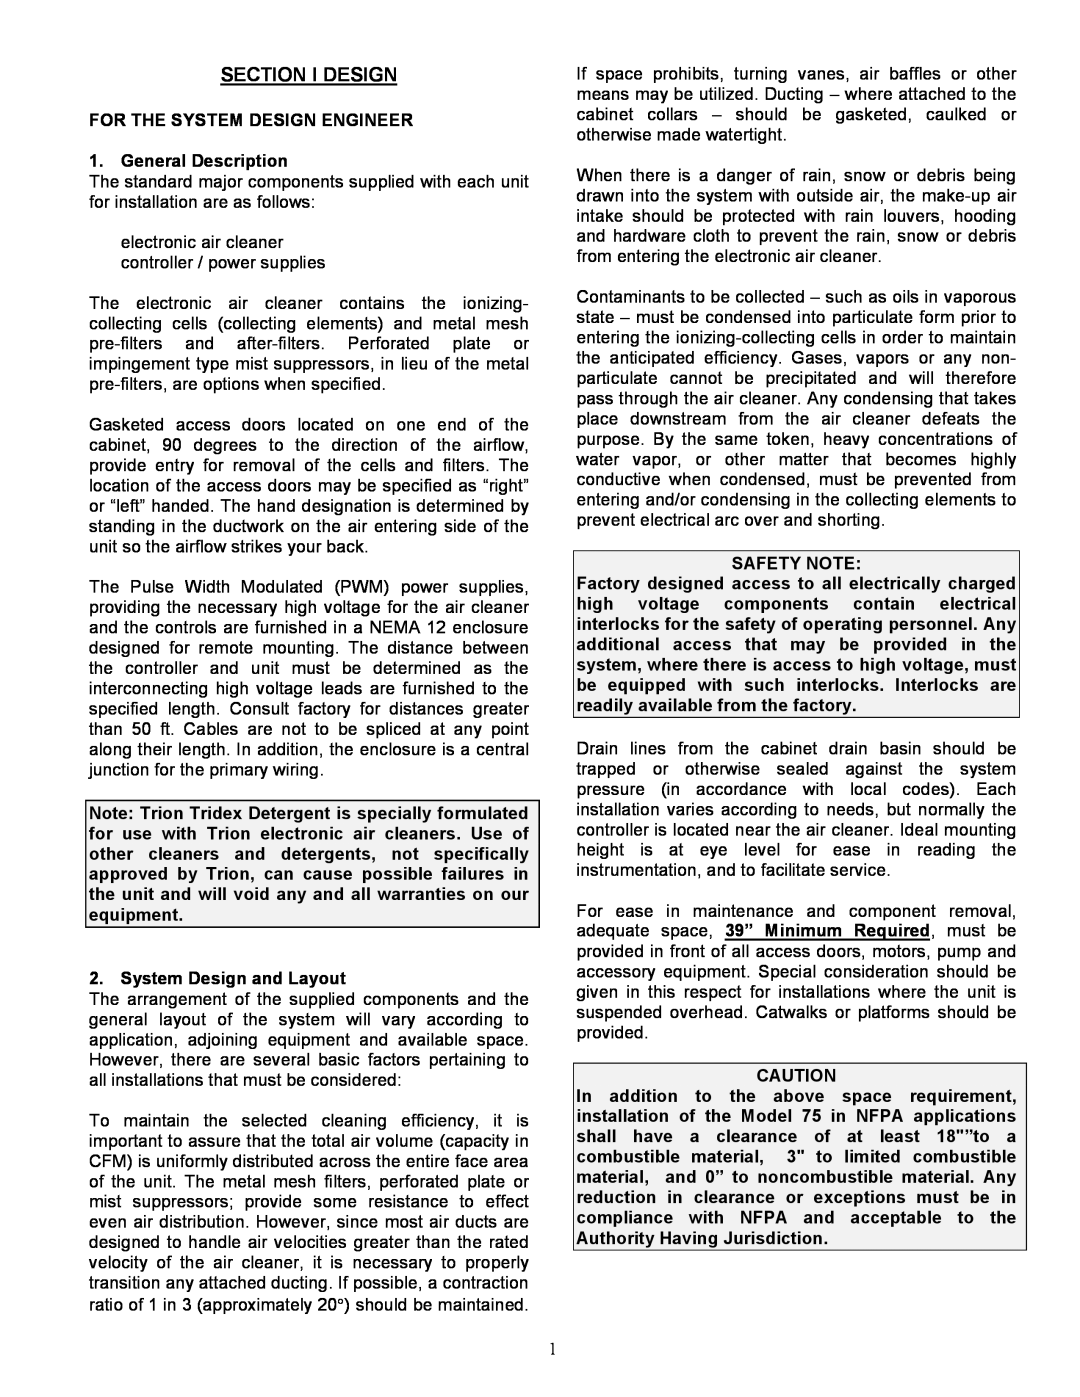 Duracell 75 Section I Design, For The System Design Engineer, General Description, System Design and Layout, Safety Note 